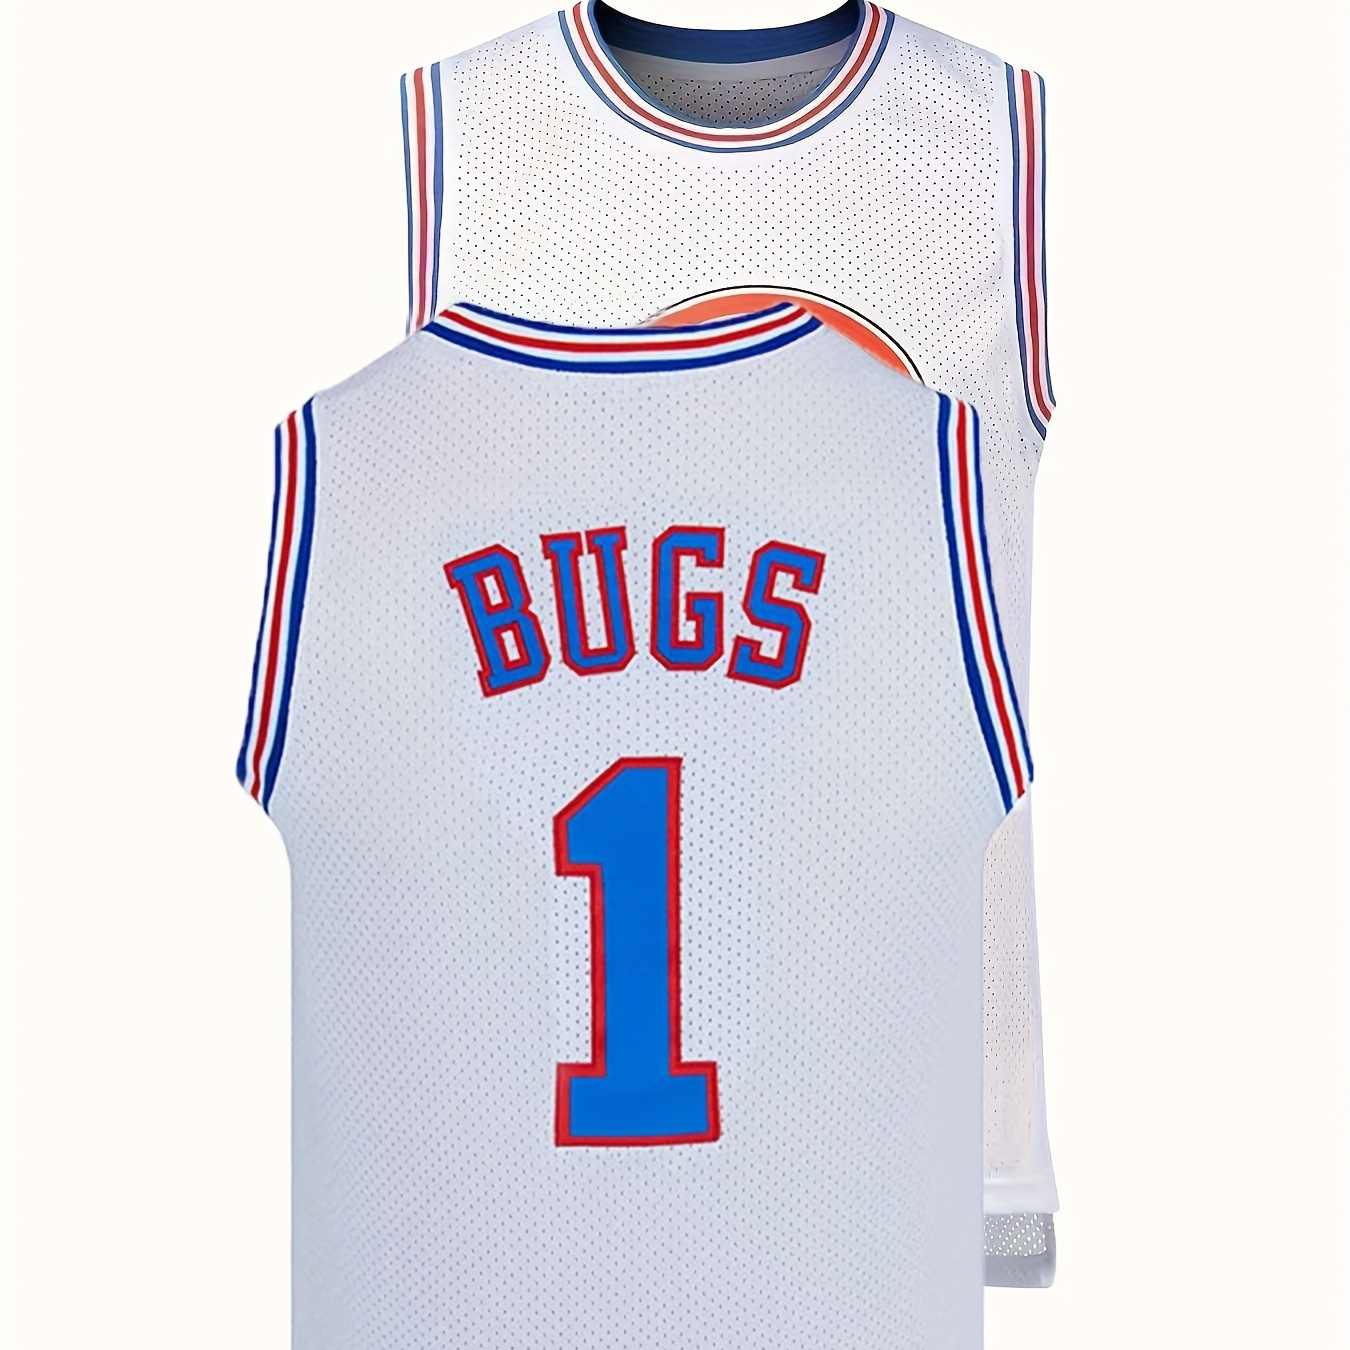 

Men's Bugs #1 Jersey Tank Top, Match Party Training Clothing For Males